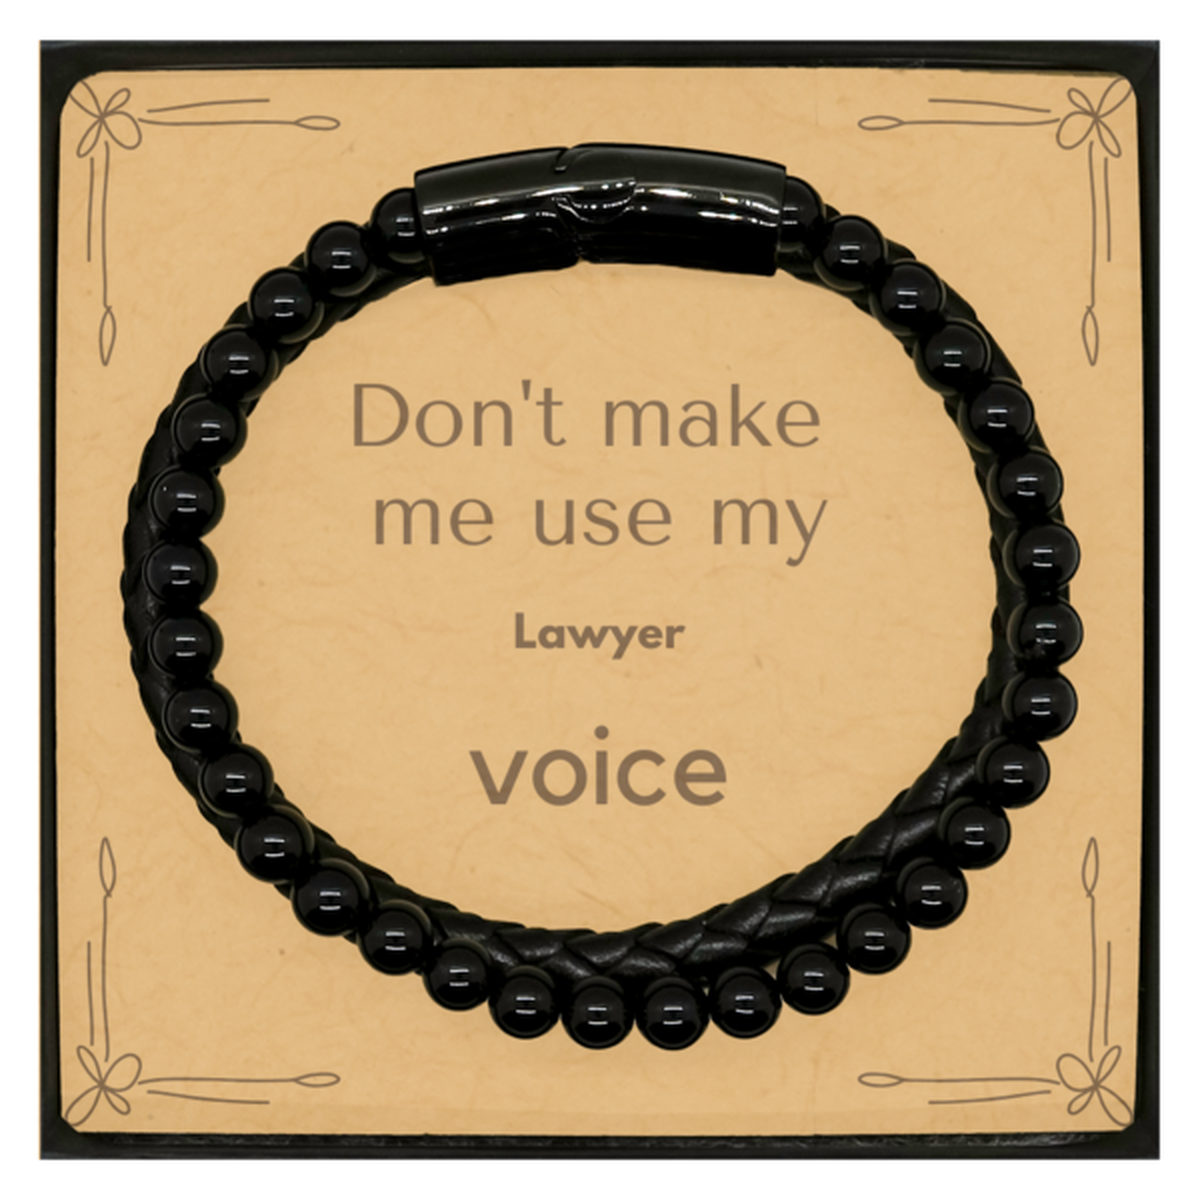 Don't make me use my Lawyer voice, Sarcasm Lawyer Card Gifts, Christmas Lawyer Stone Leather Bracelets Birthday Unique Gifts For Lawyer Coworkers, Men, Women, Colleague, Friends